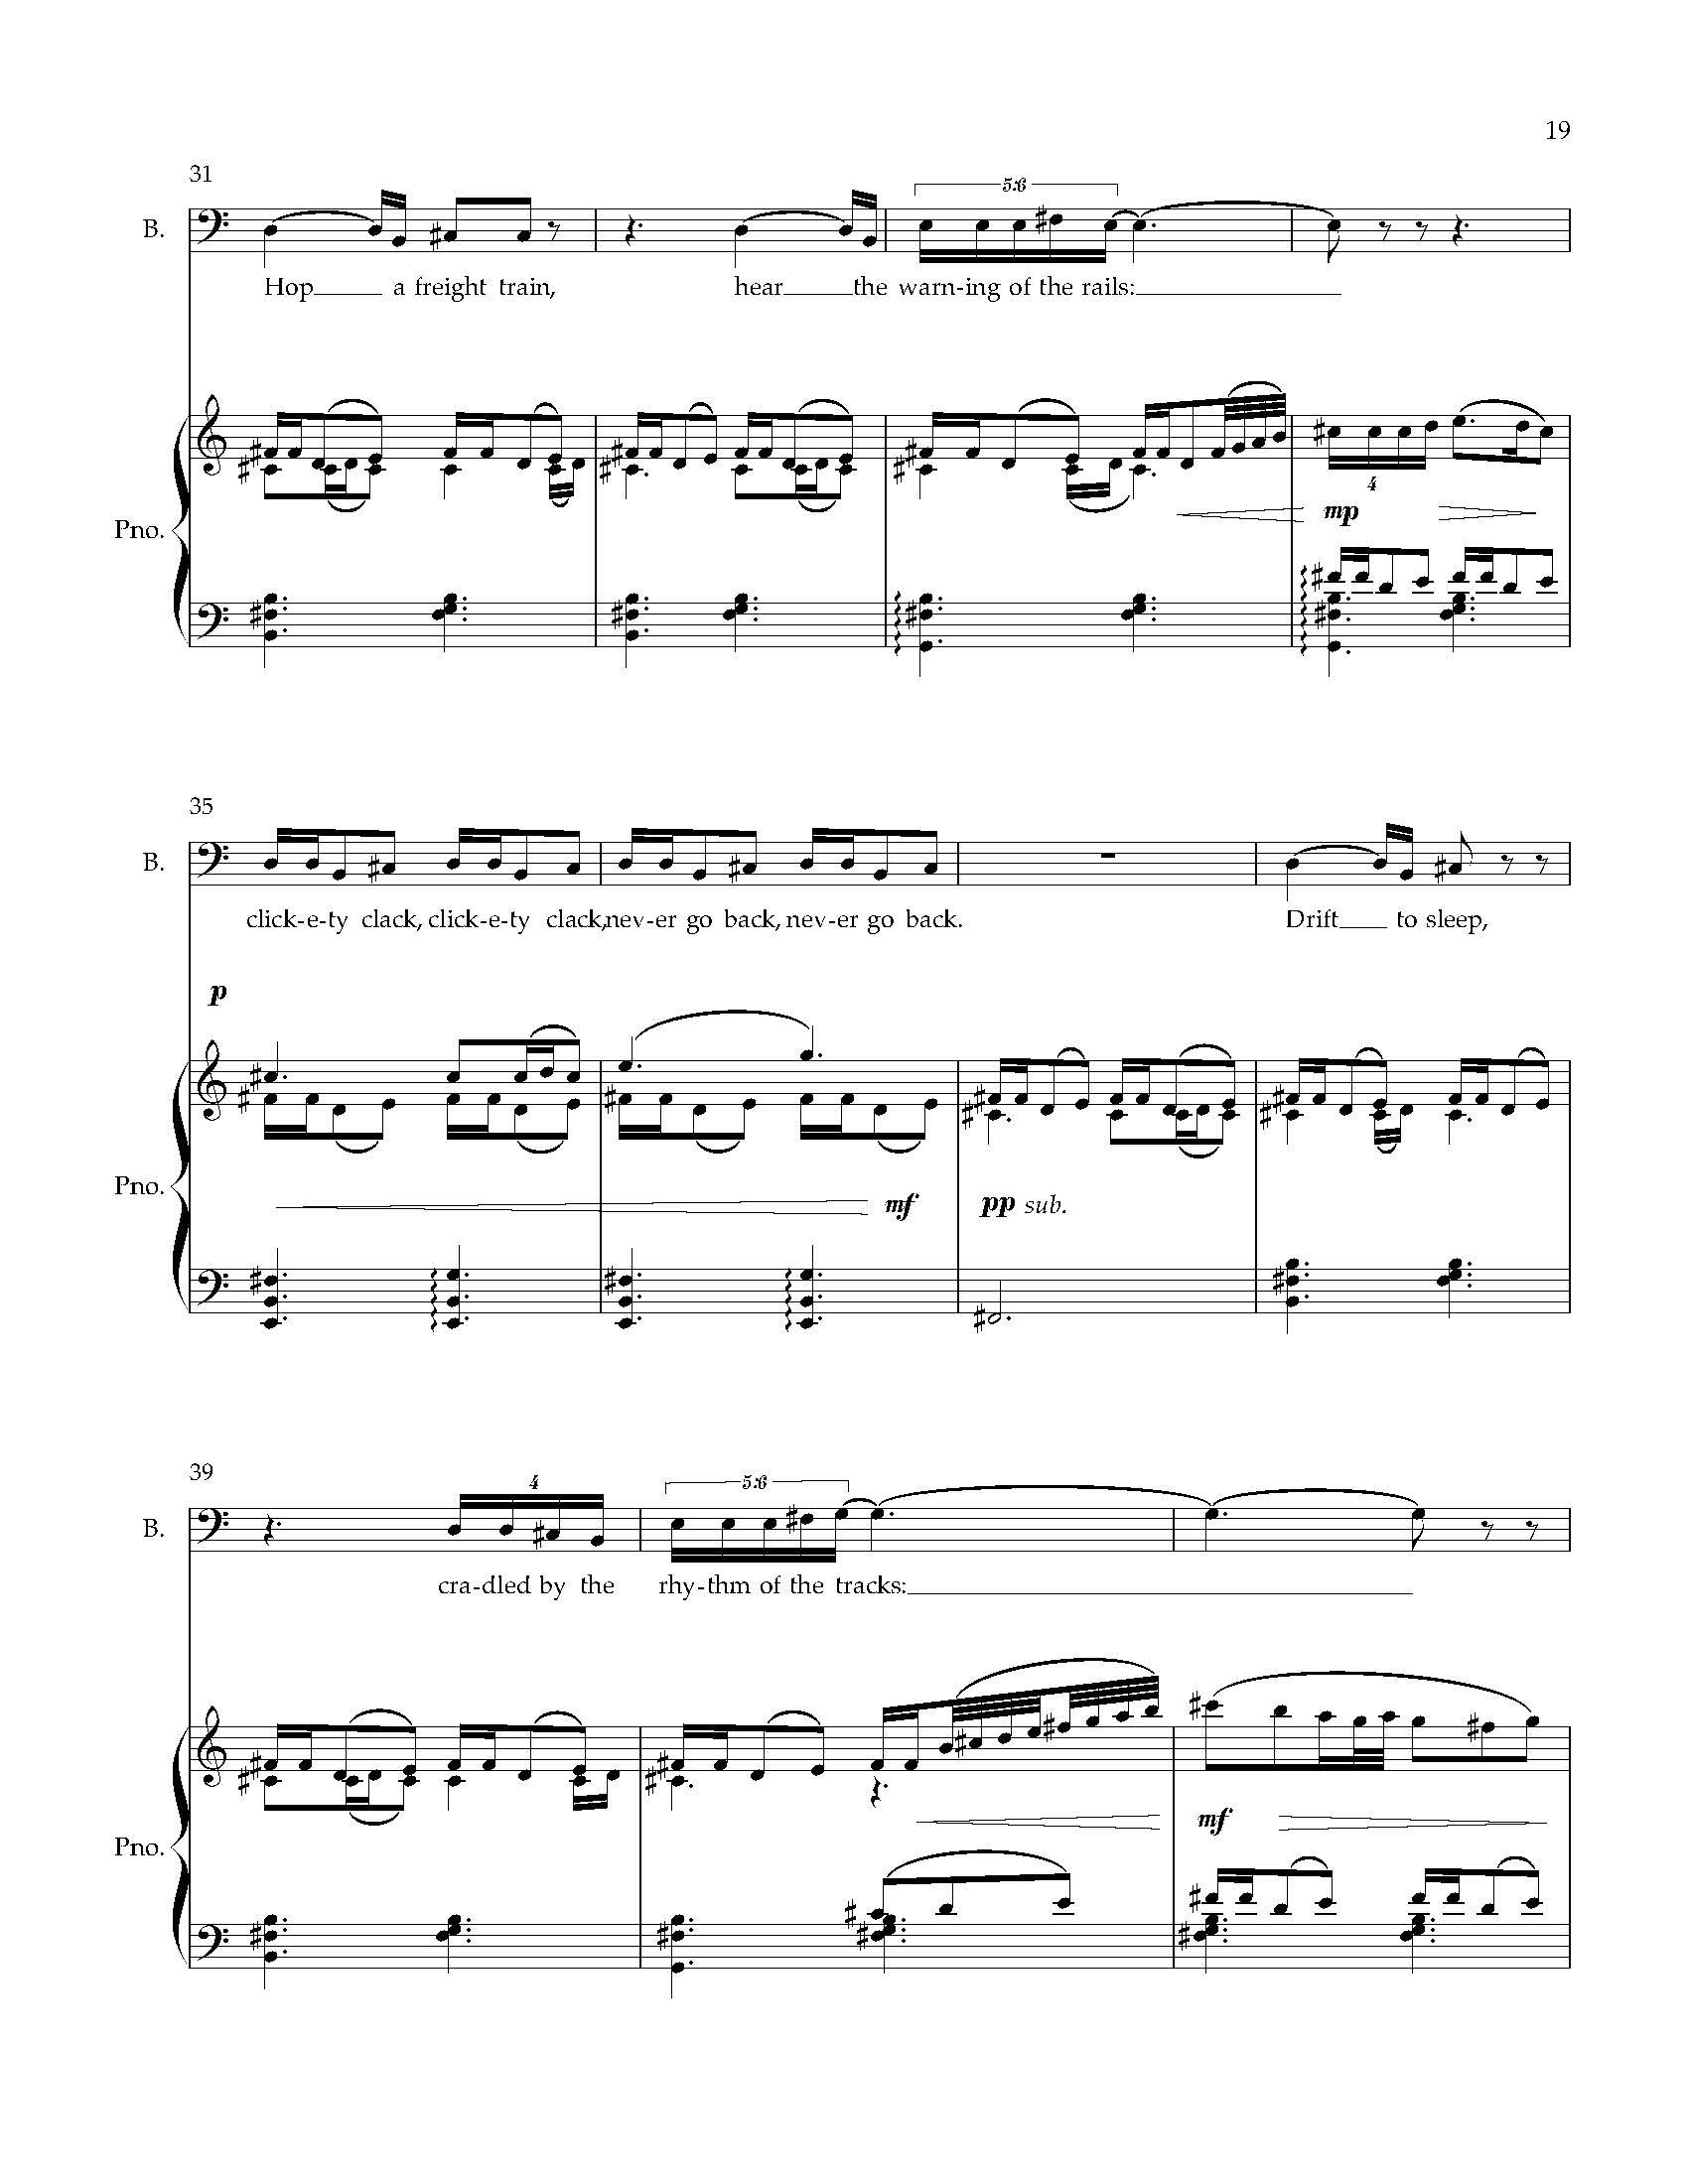 Five Arias from HWGS - Complete Score (1)_Page_23.jpg